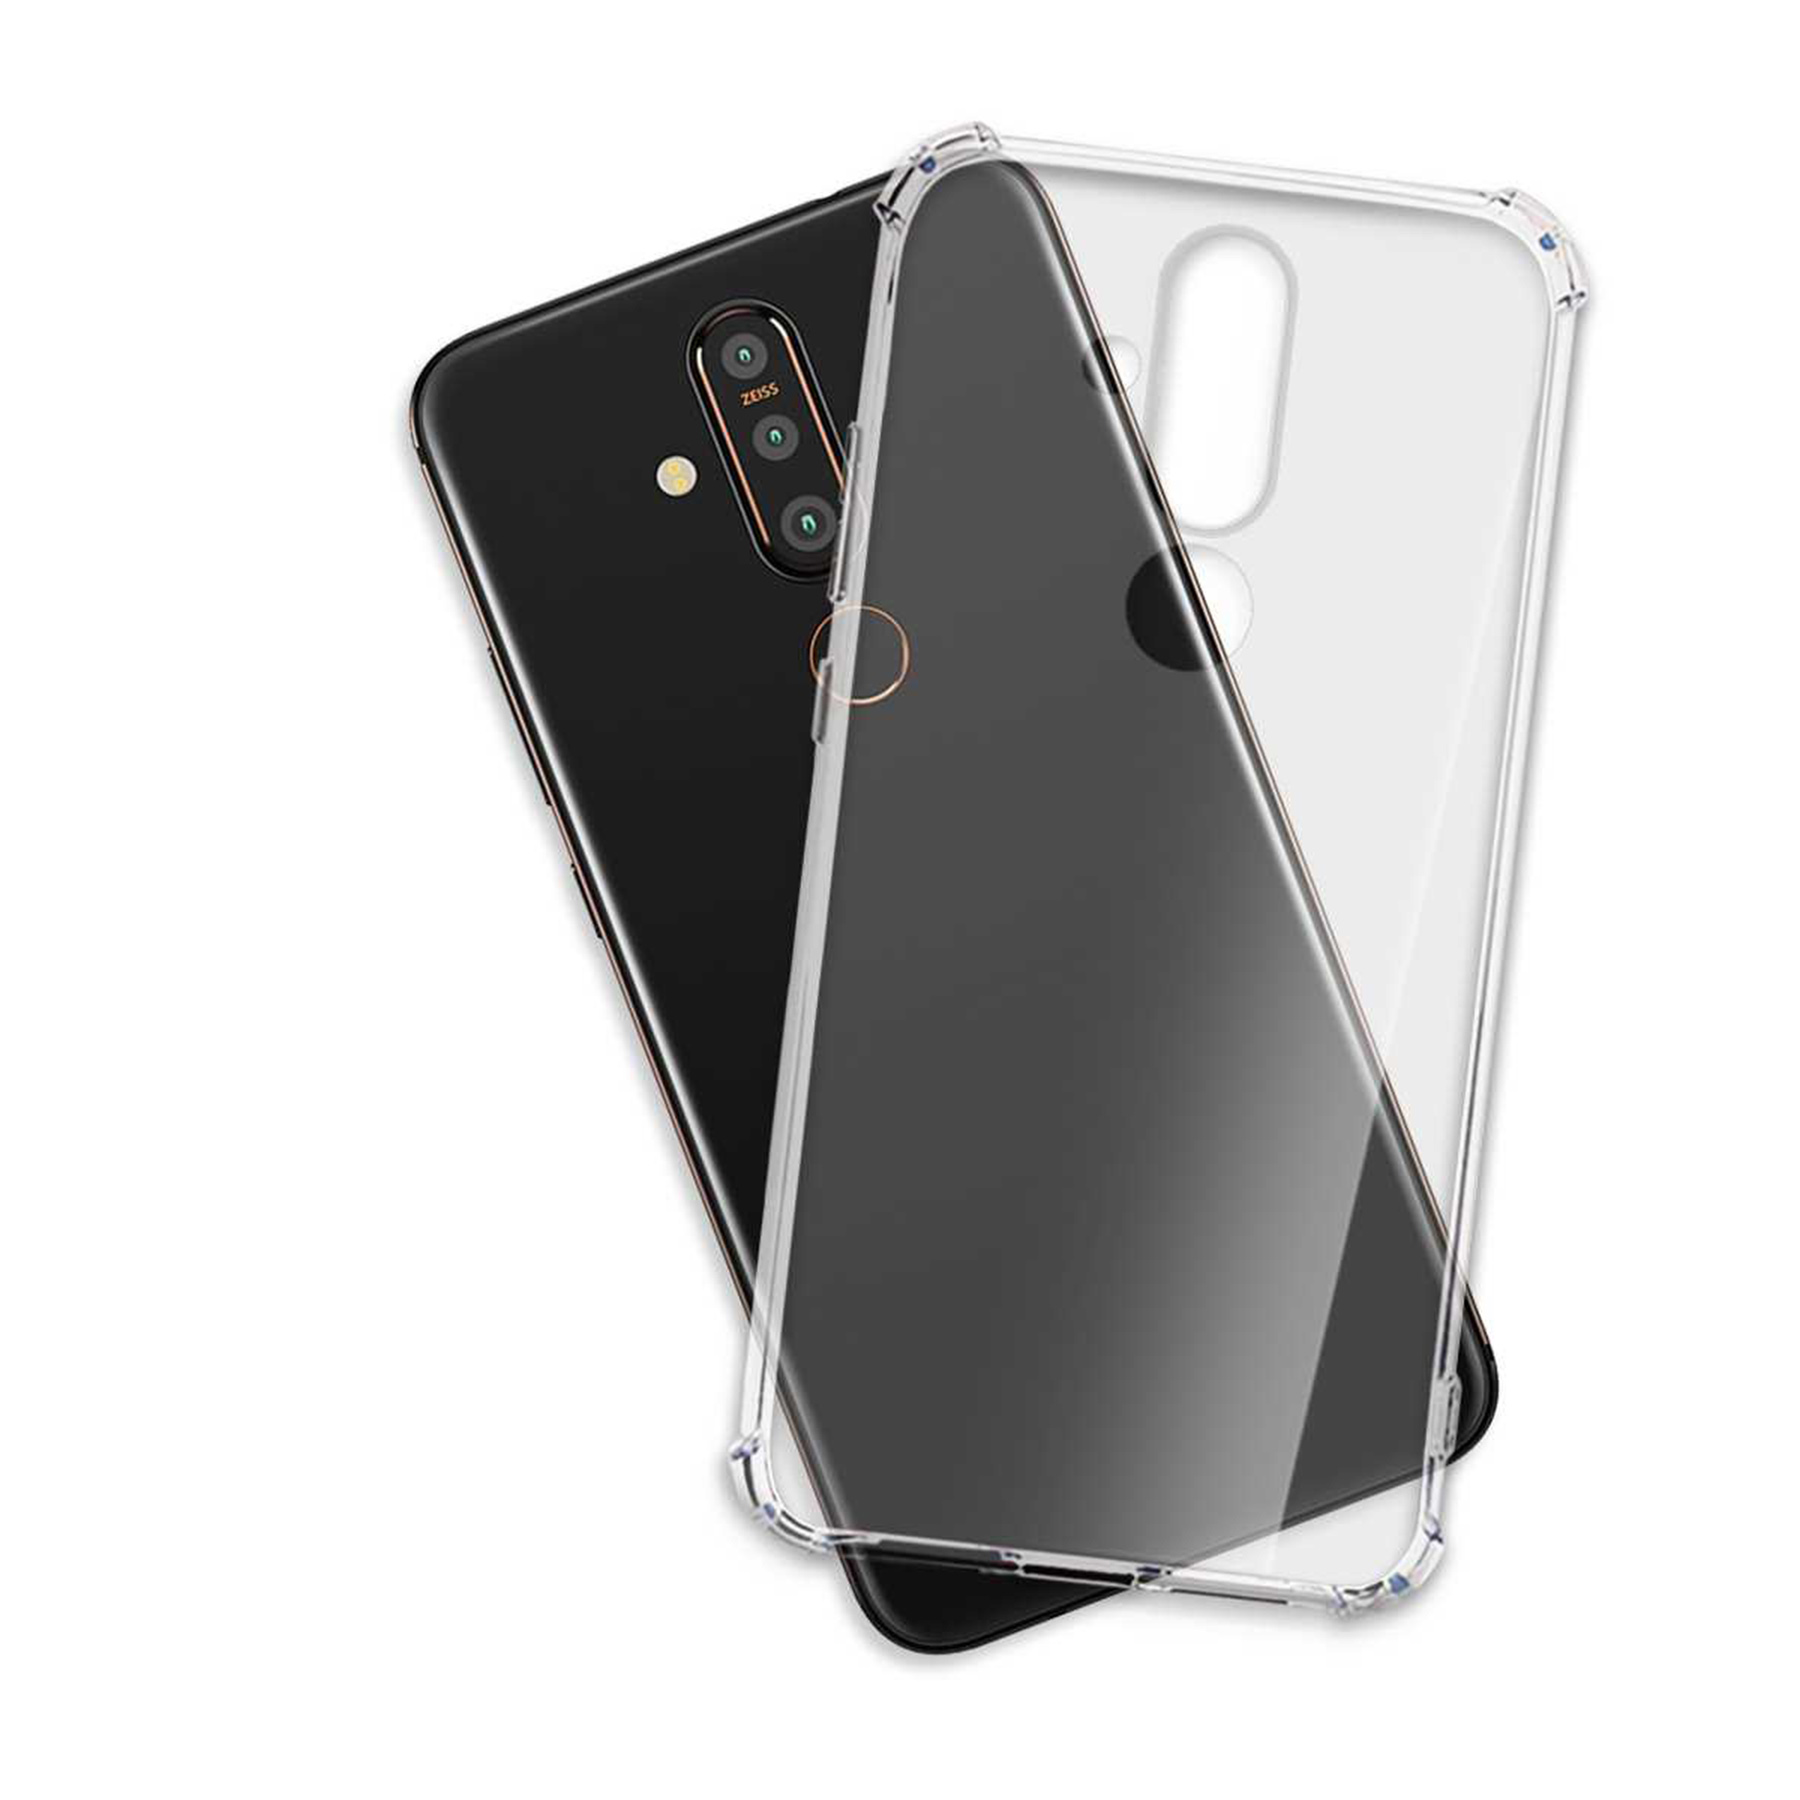 Backcover, ENERGY Transparent 2022-01-08T00:00:00.000+01:00, MTB Armor Nokia, Case, Clear MORE